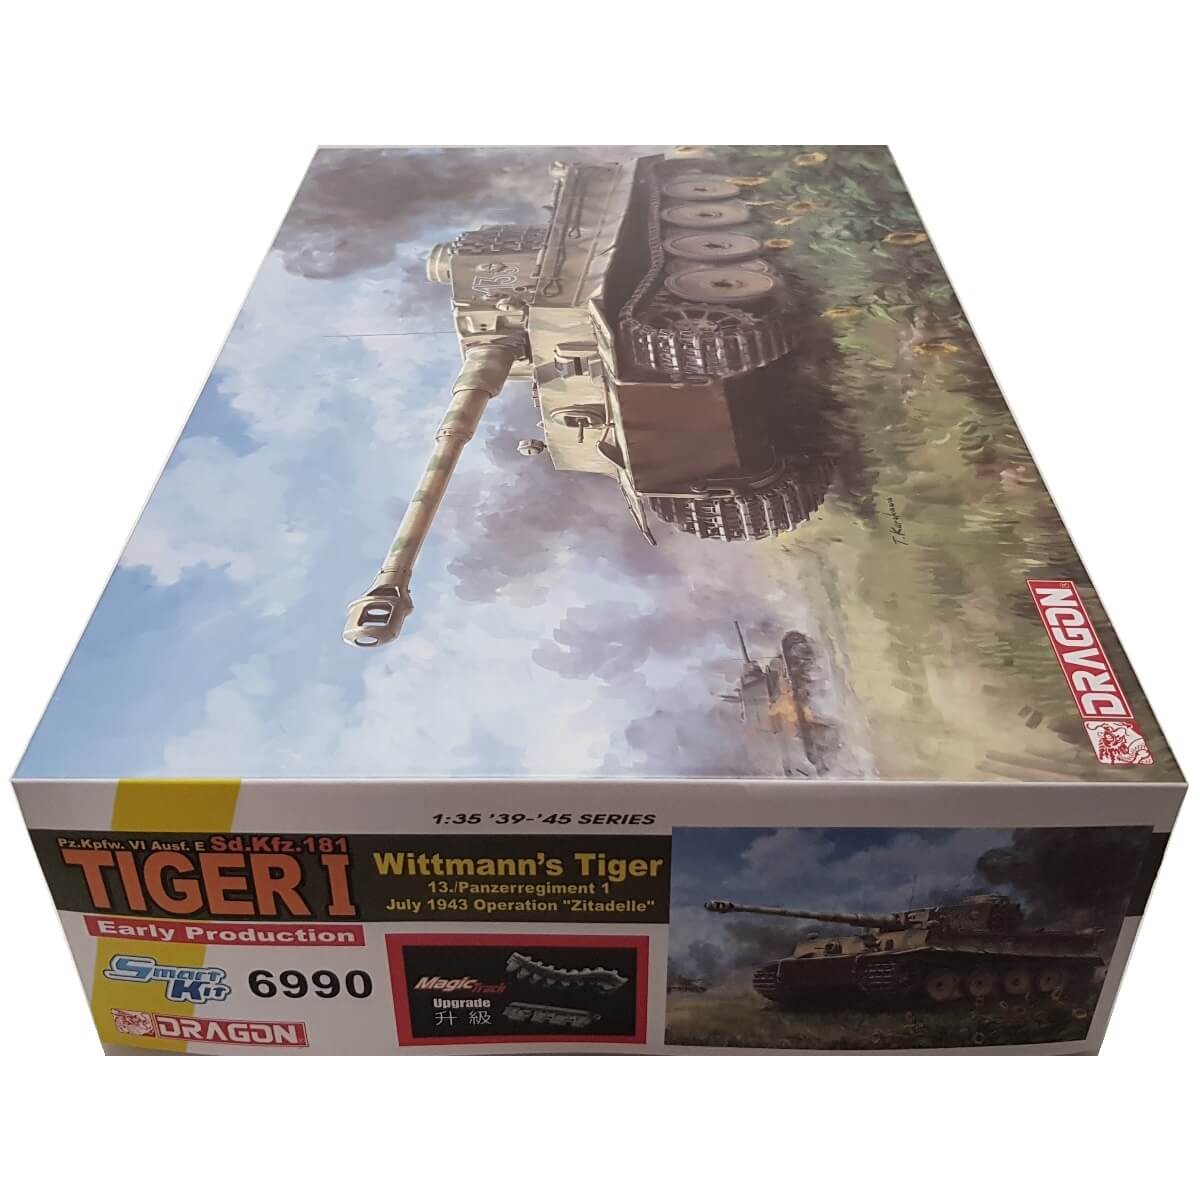 1:35 Tiger I Early Production - Wittmann's Tiger 13./Panzer Regiment 1 - July 1943 Operation "Zitadelle" - DRAGON